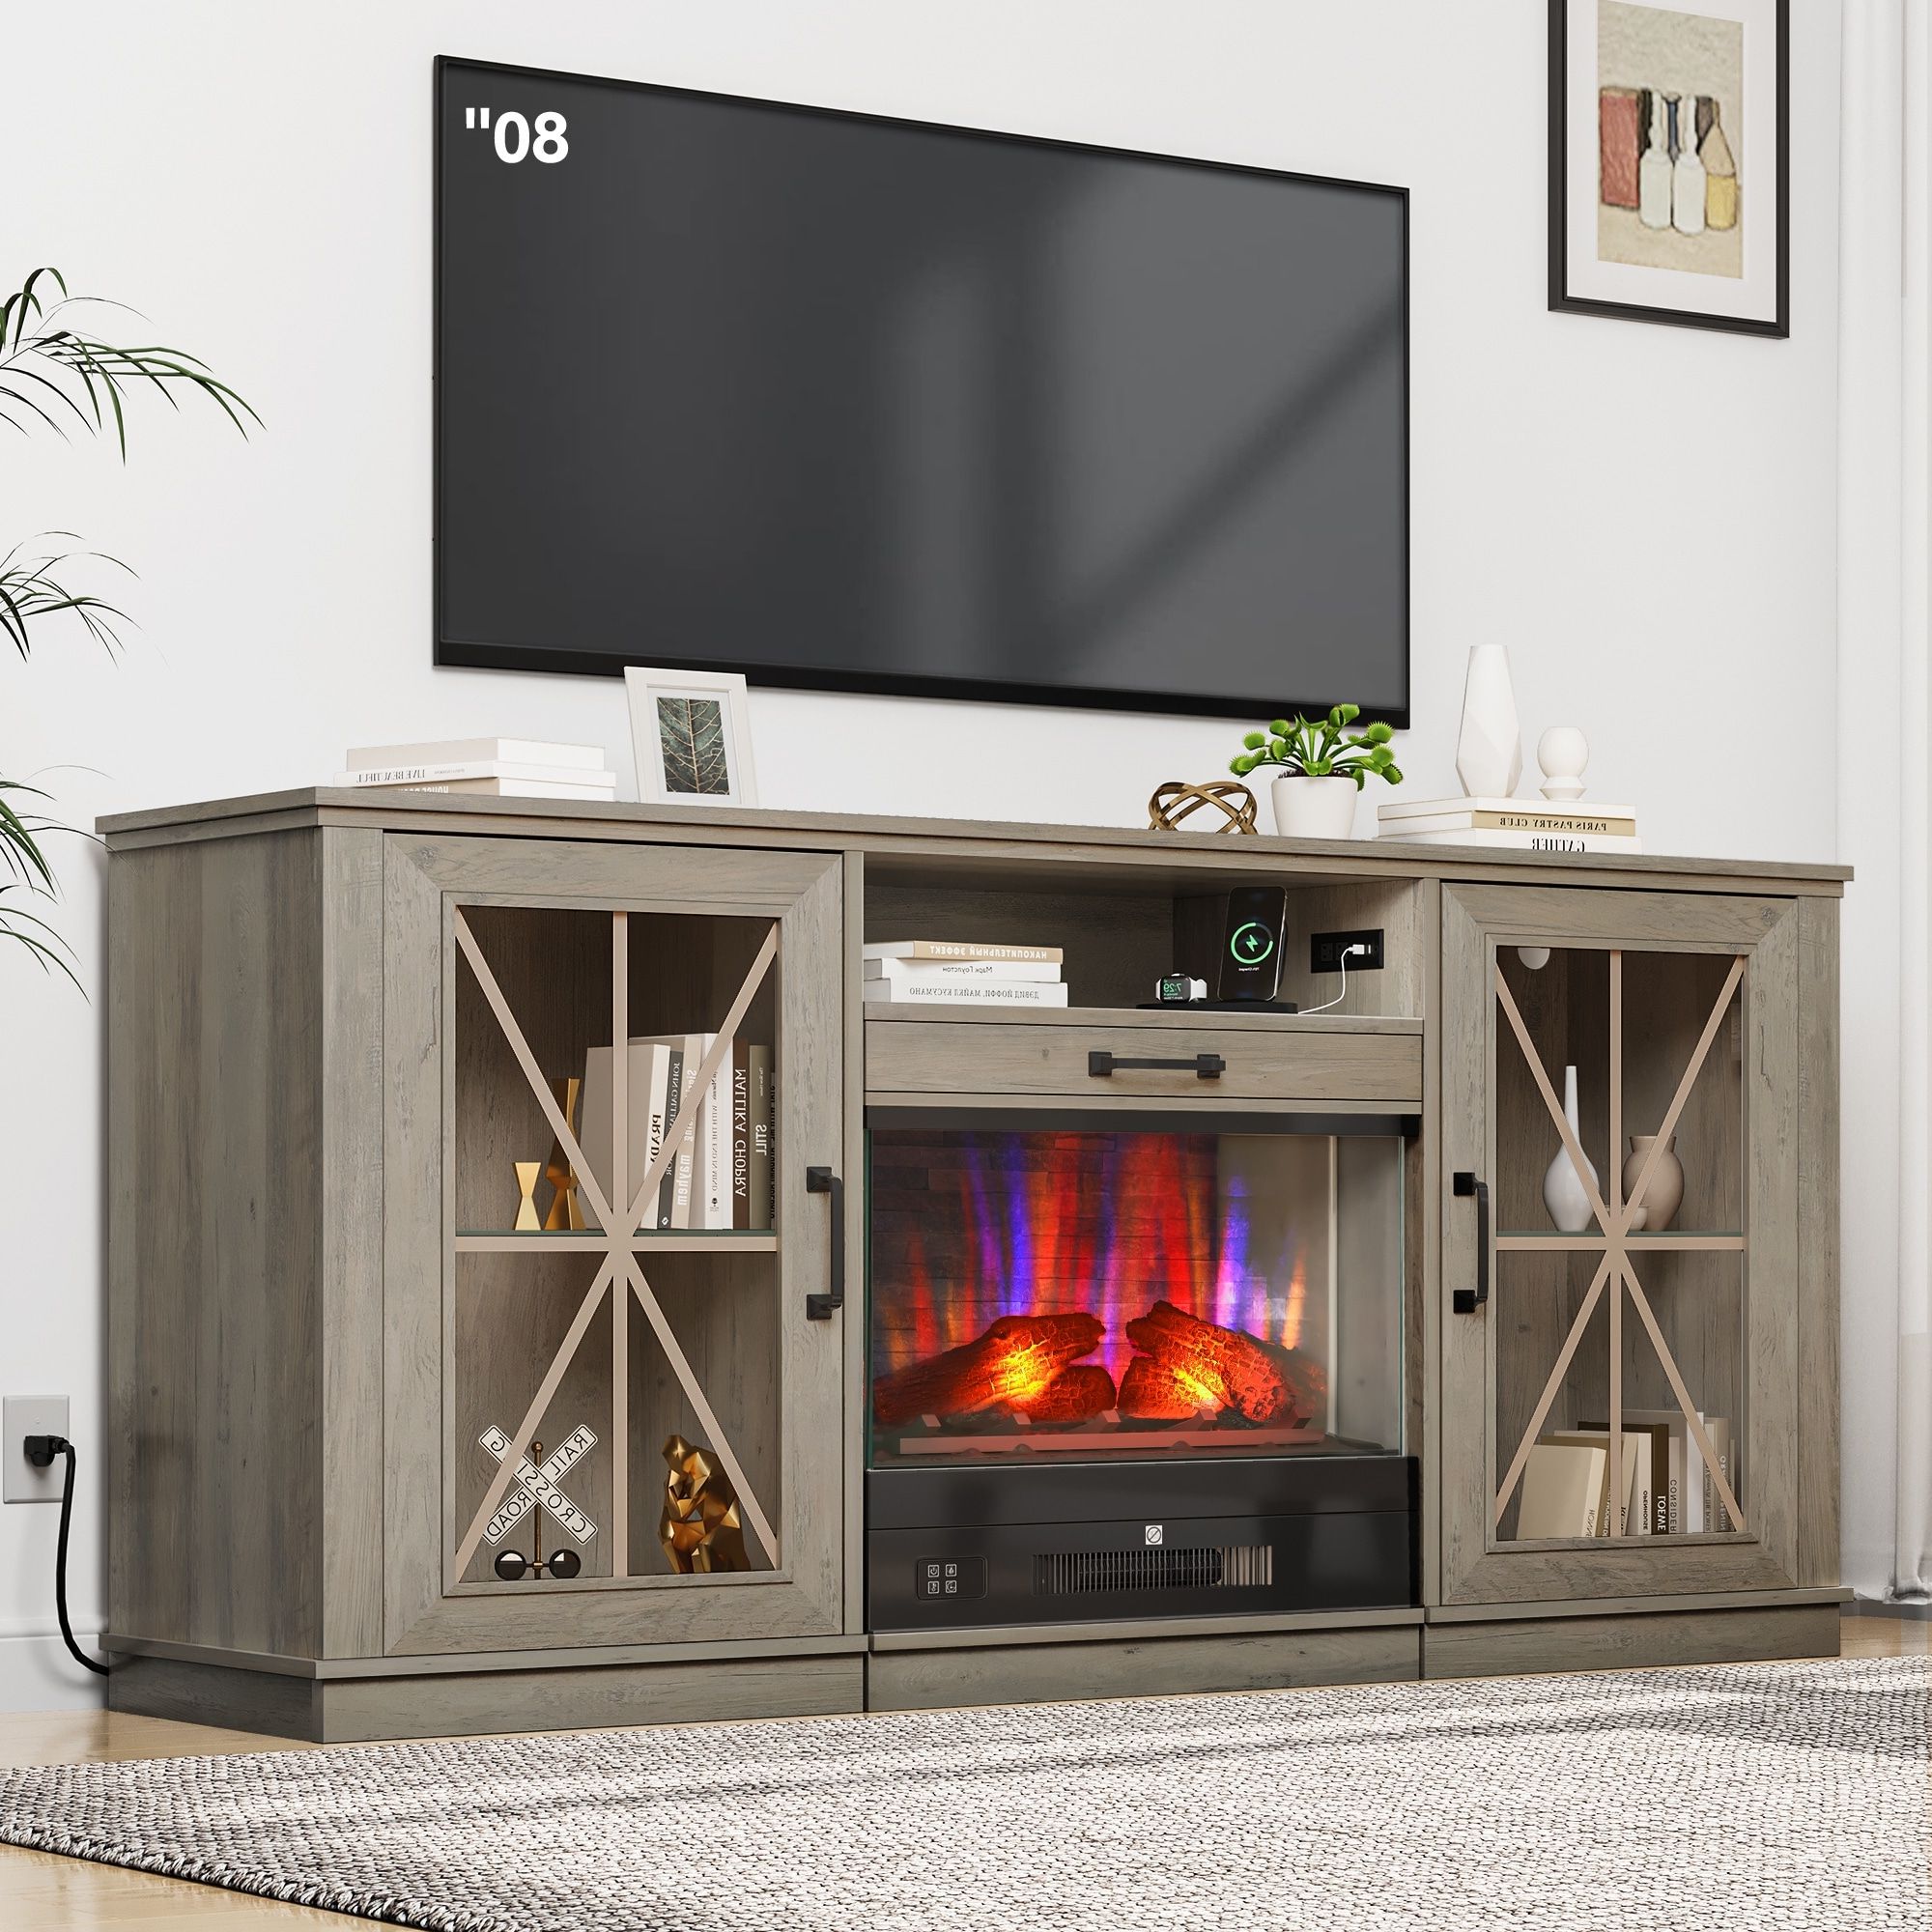 Modern Fireplace Tv Stand With Drawable Fireplace – On Sale – Bed Bath &  Beyond – 38403615 With Regard To Modern Fireplace Tv Stands (View 2 of 20)